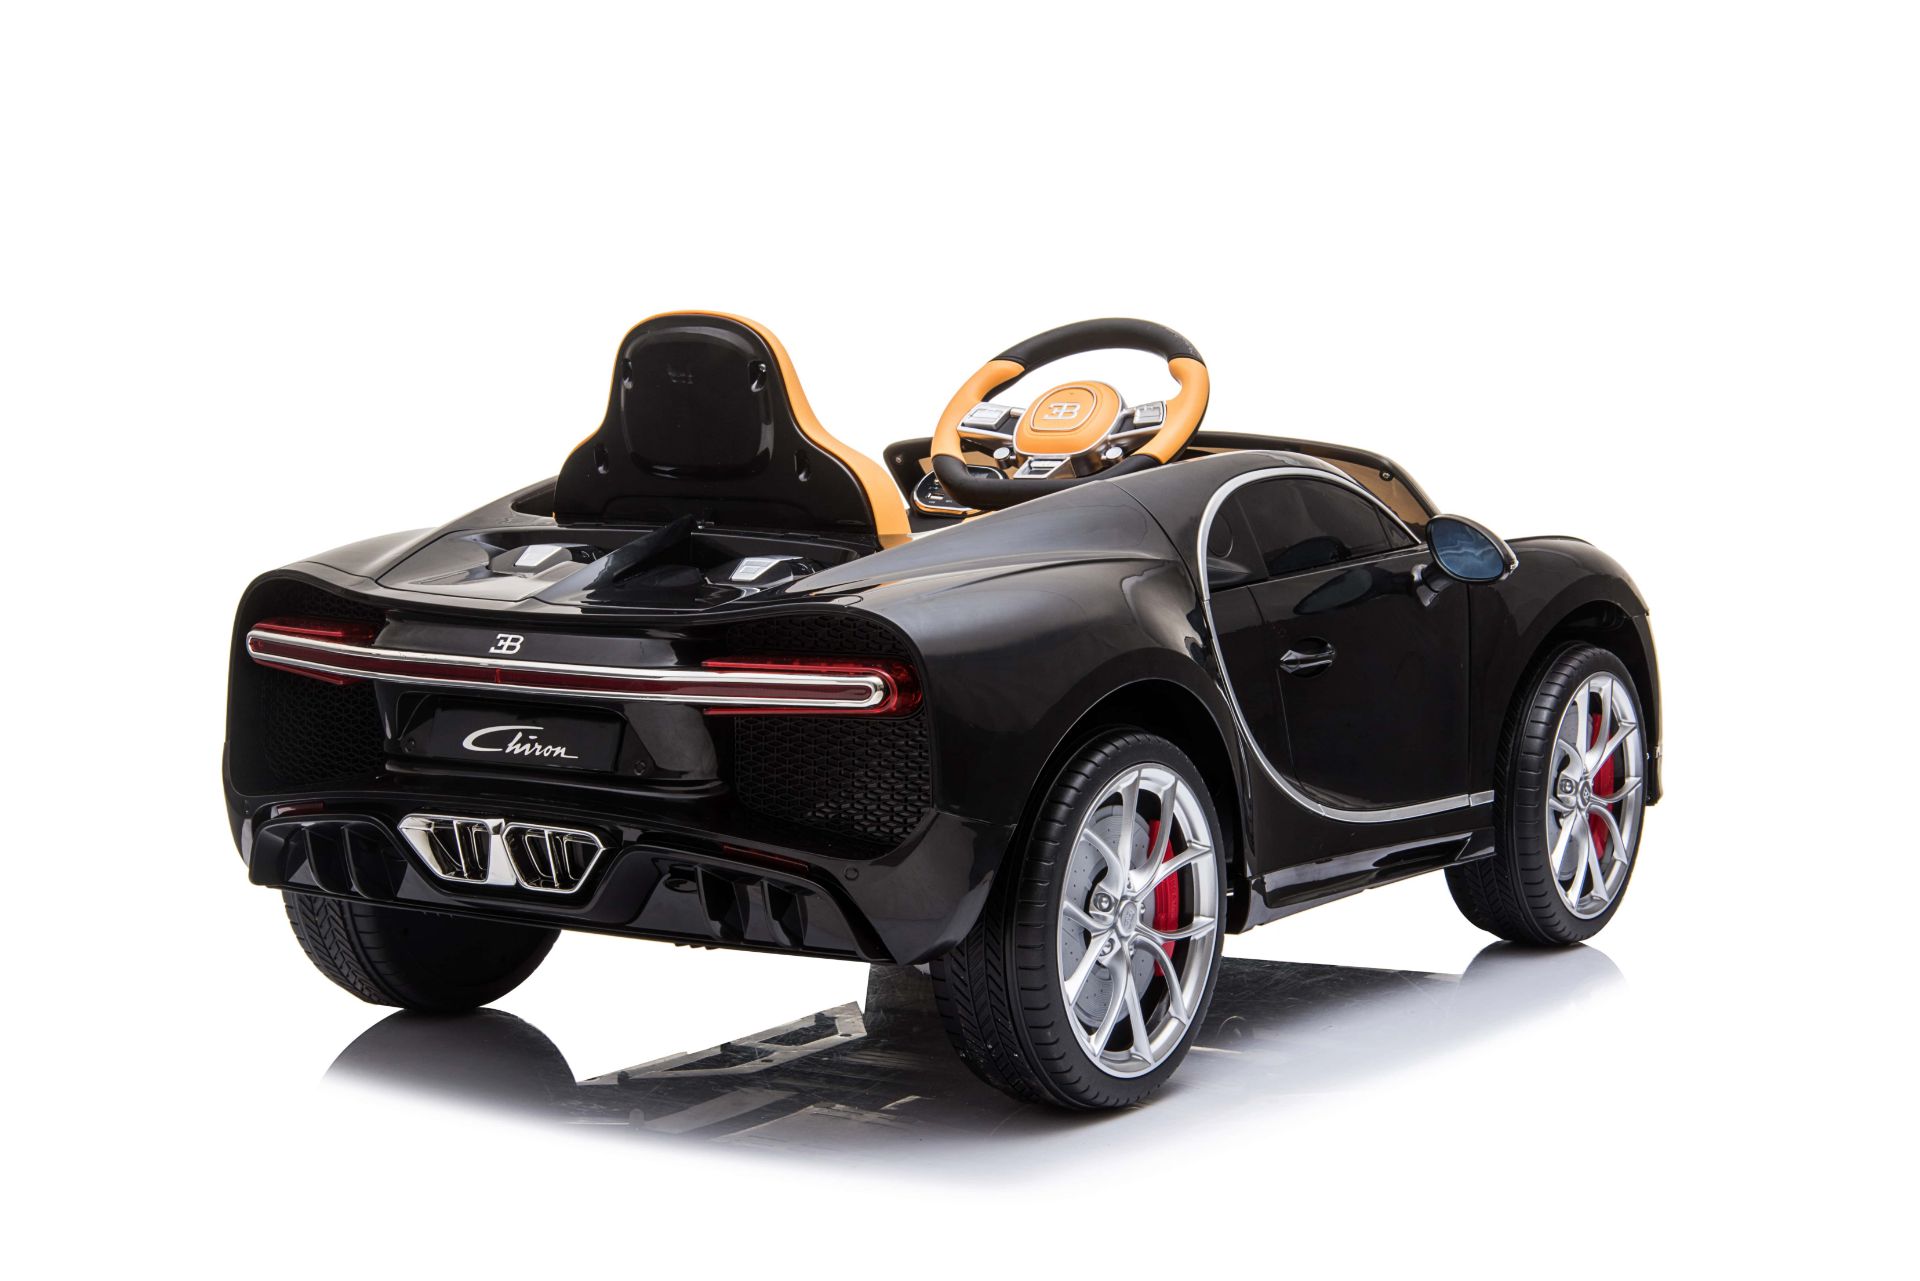 RIDE ON FULLY LICENCED BUGATTI CHIRON 12V WITH PARENTAL REMOTE CONTROL - BLACK - Image 5 of 7